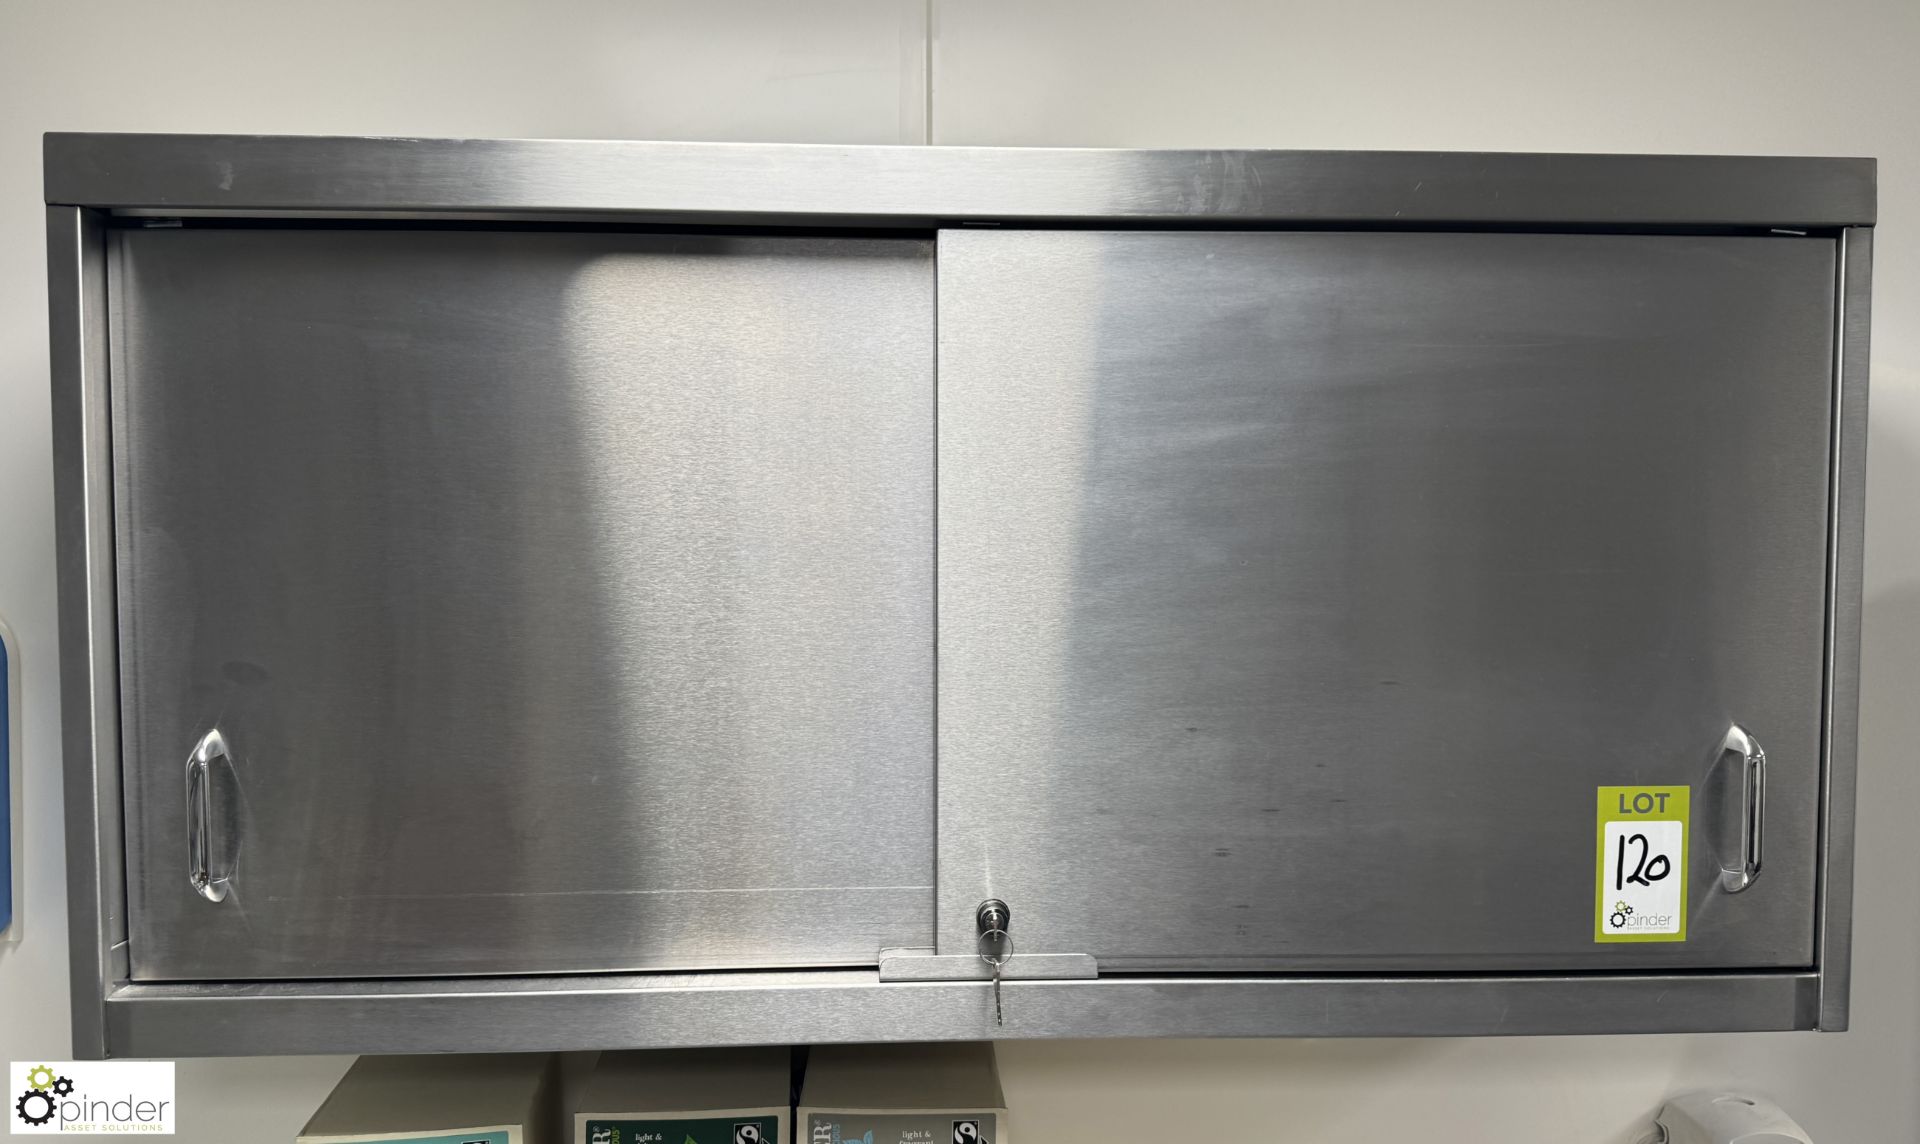 2 stainless steel wall mounted Cabinets, 1000mm x 300mm x 600mm (location in building - level 7) - Image 2 of 4